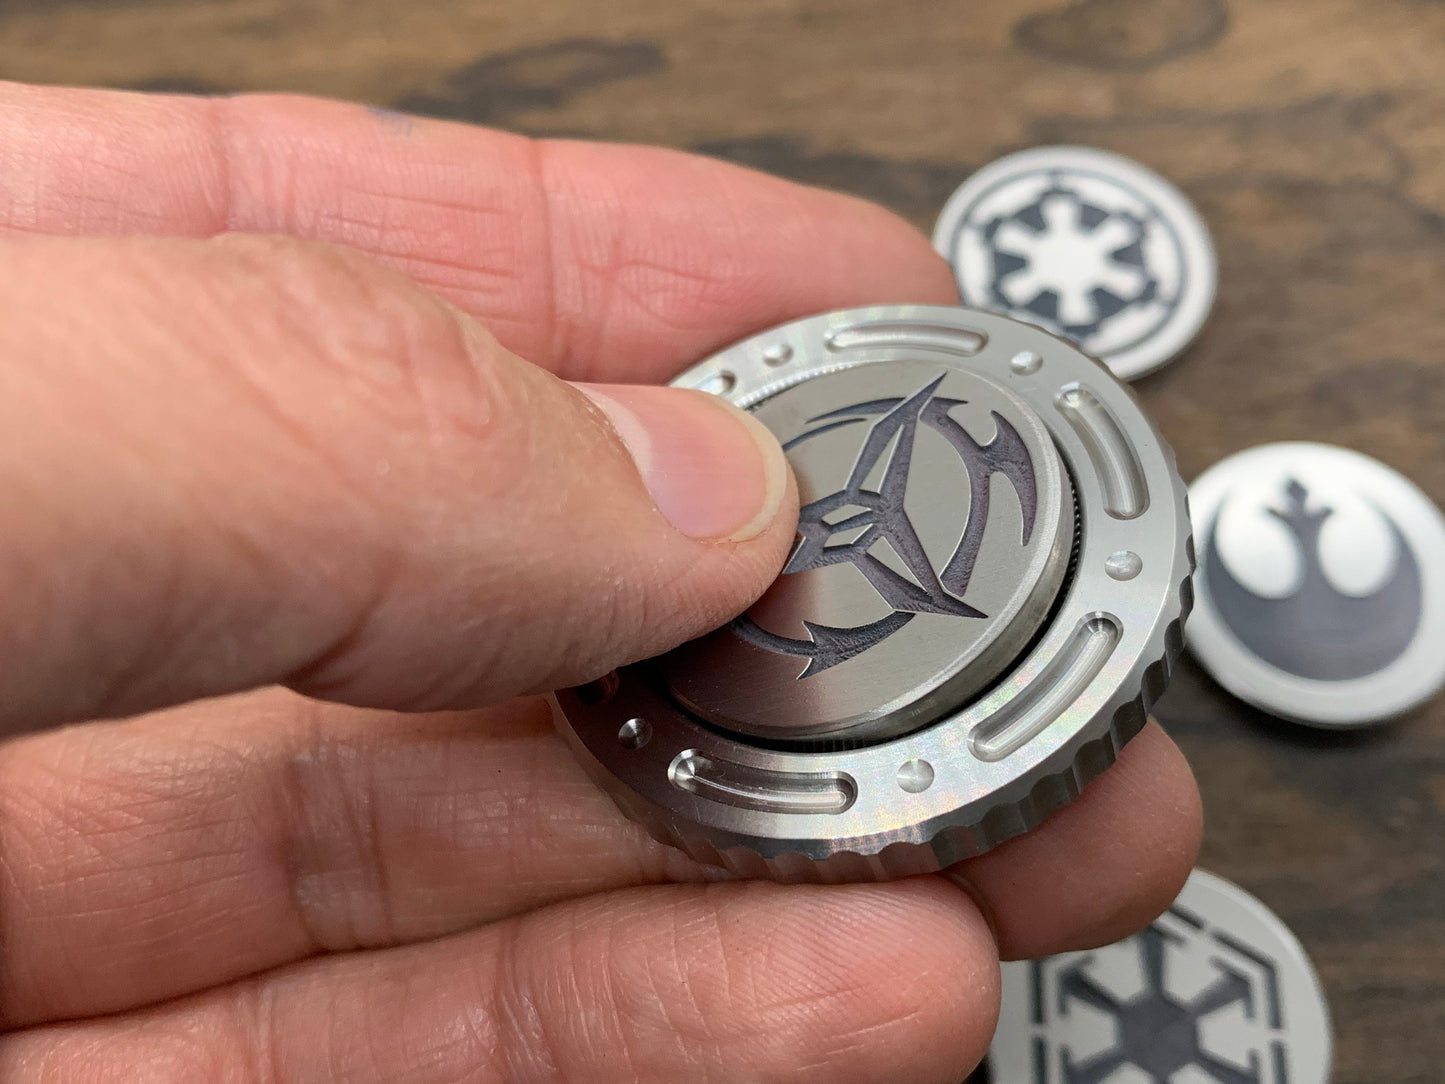 Deep engraved STAR WARS Symbols Stainless Steel Coin for Billetspin Gambit